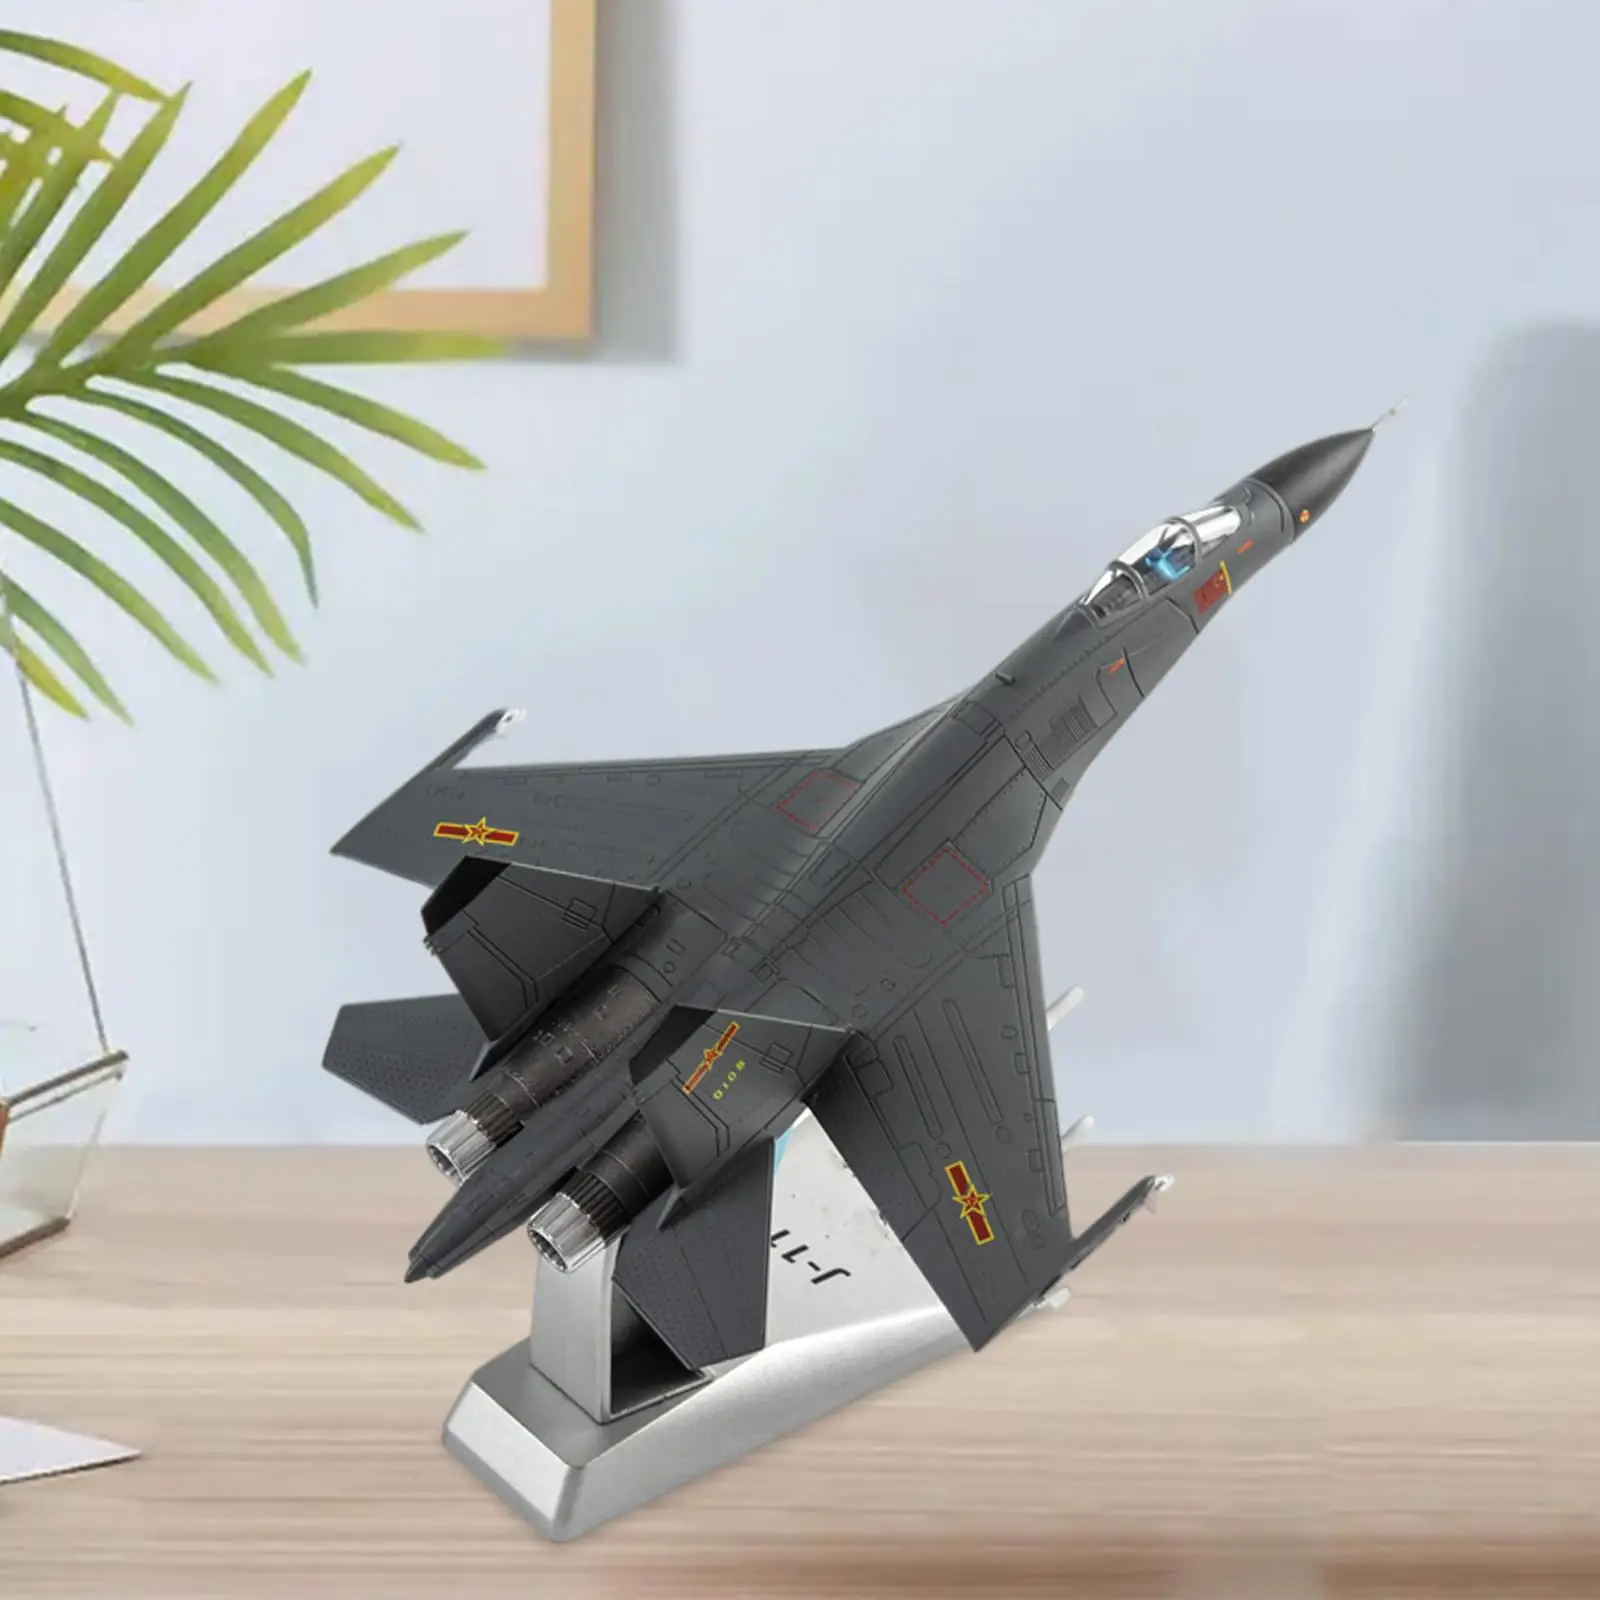 Diecast 1/100 Scale Aircraft J-11 Fighter for Table Decoration